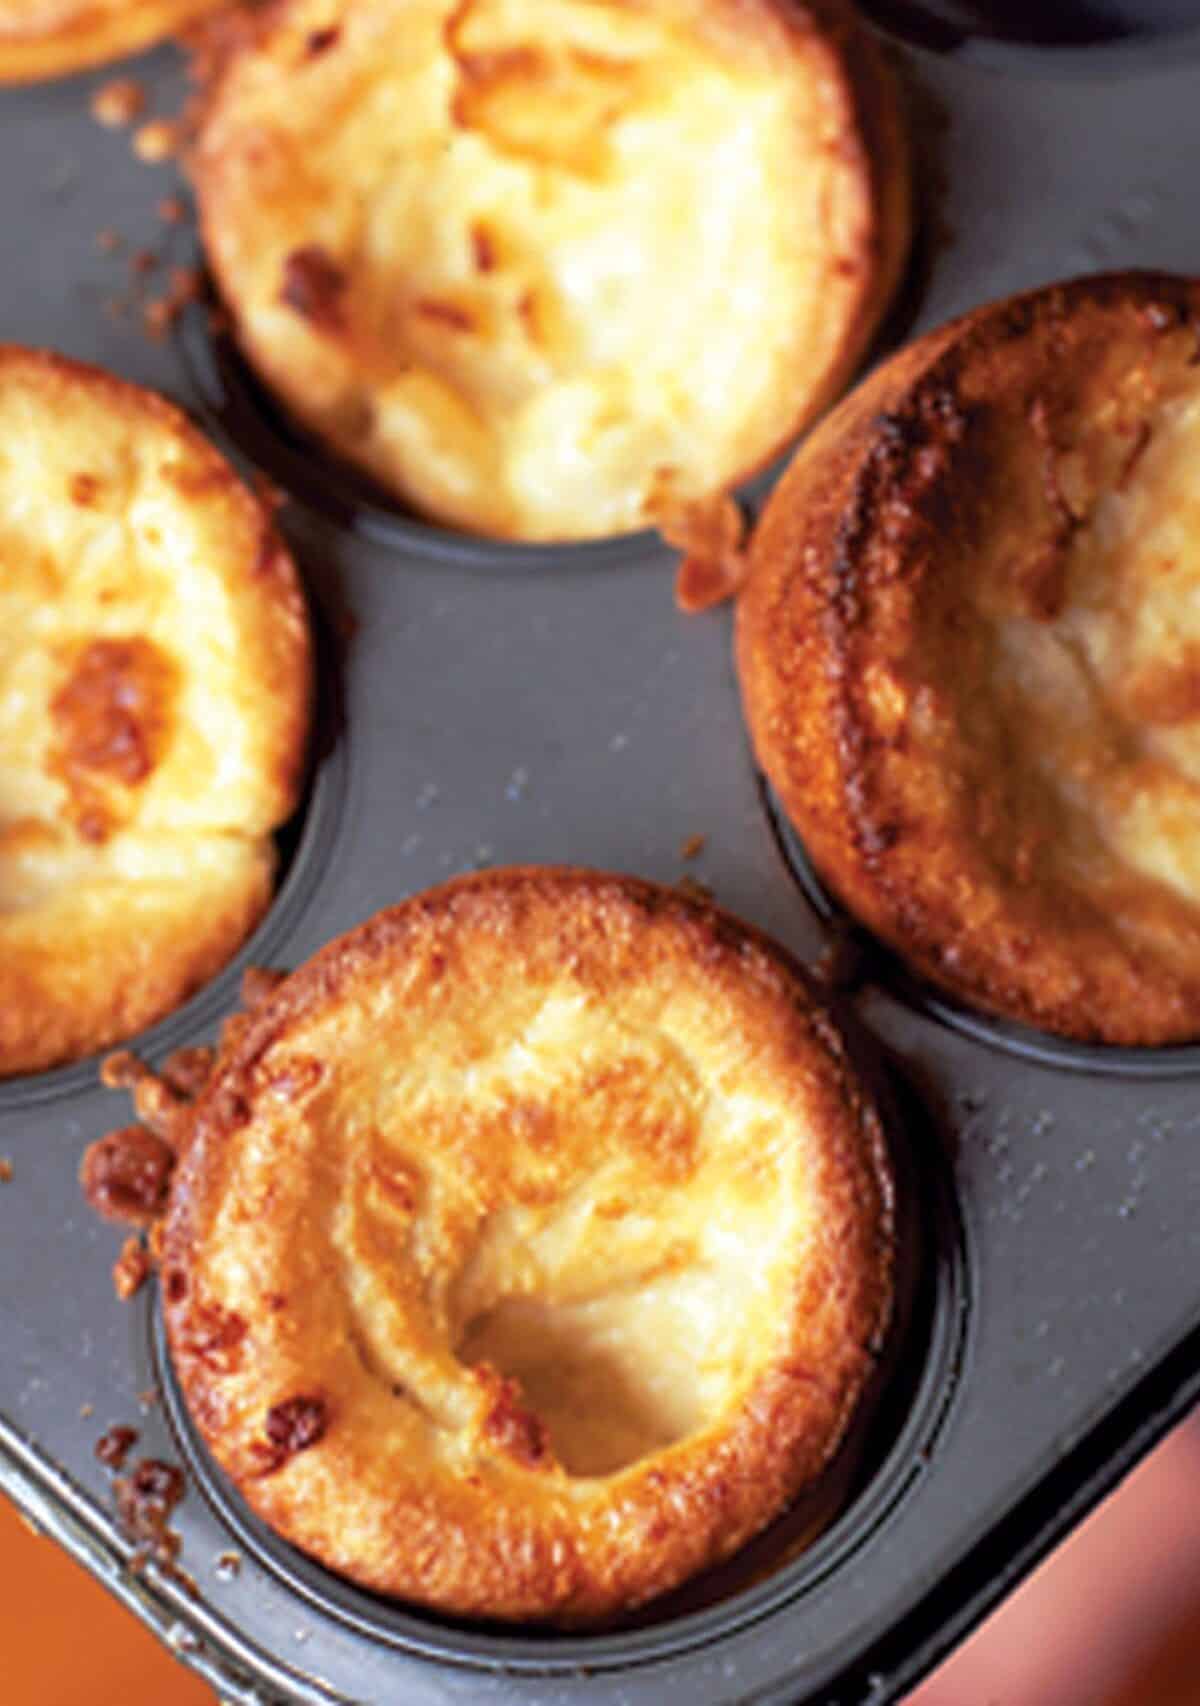  Don't forget the gravy! Yorkshire pudding pairs perfectly with a rich sauce